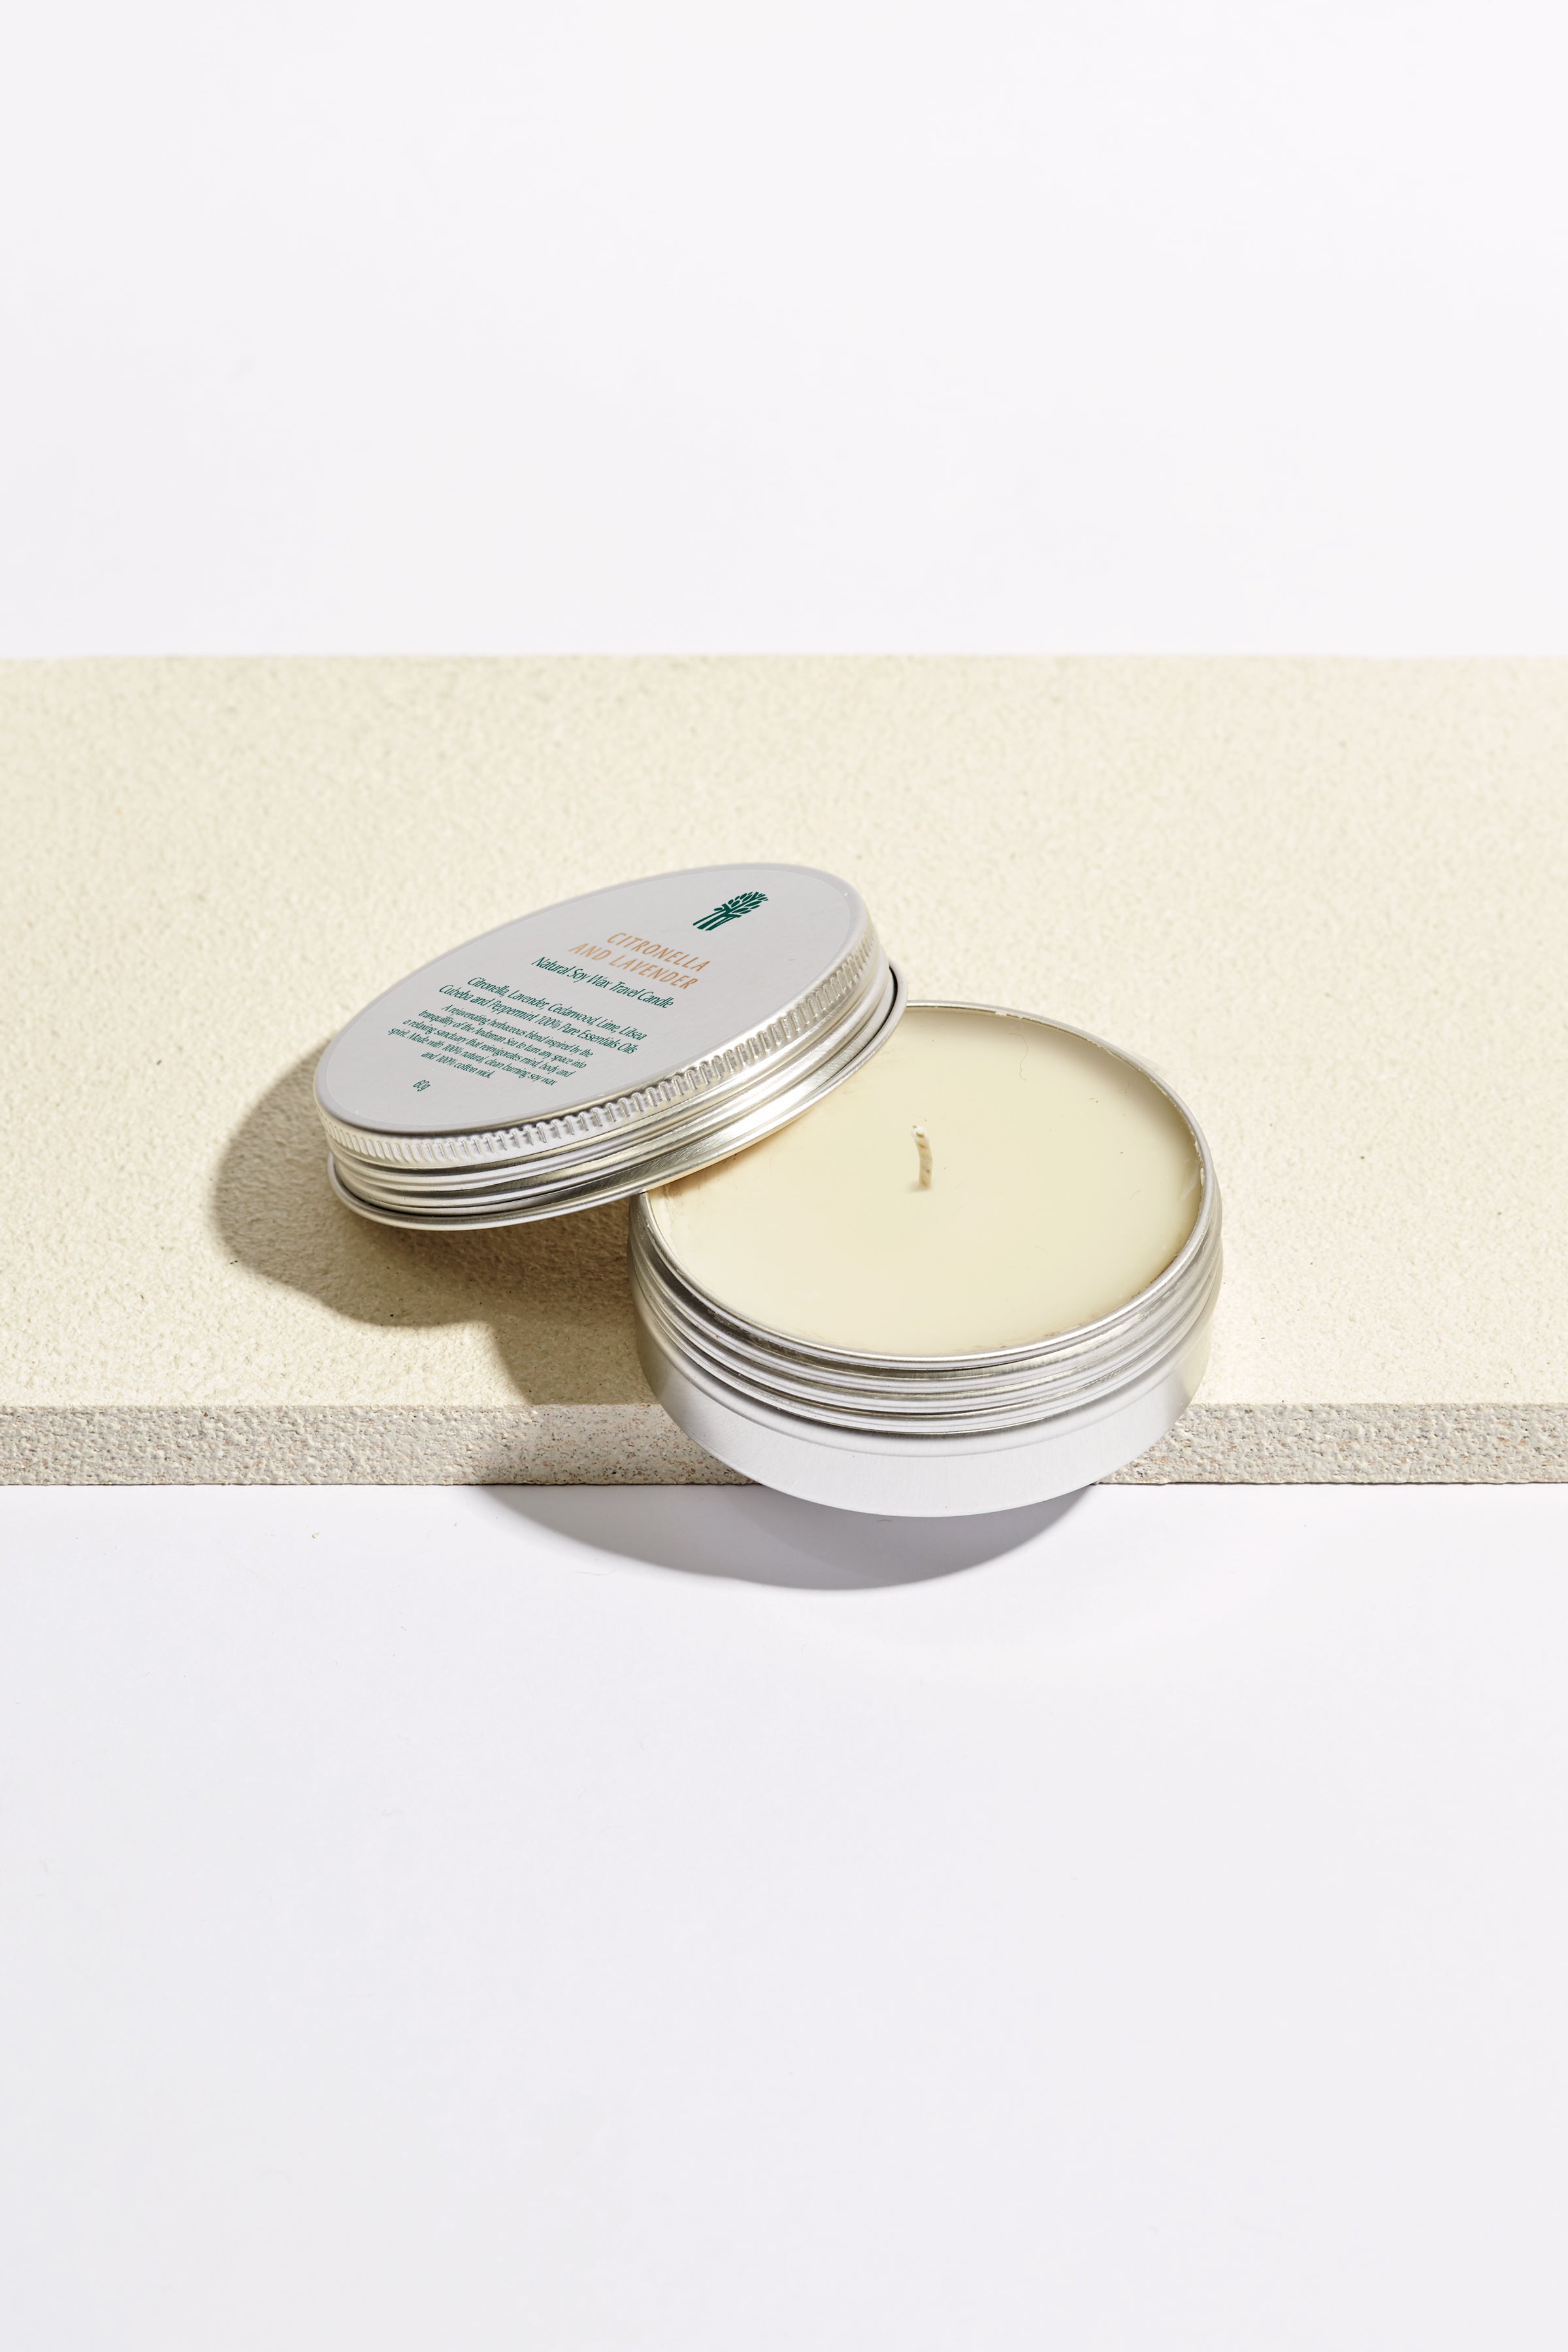 Citronella and Lavender Natural Soy Wax Travel Candle - Banyan Tree Gallery